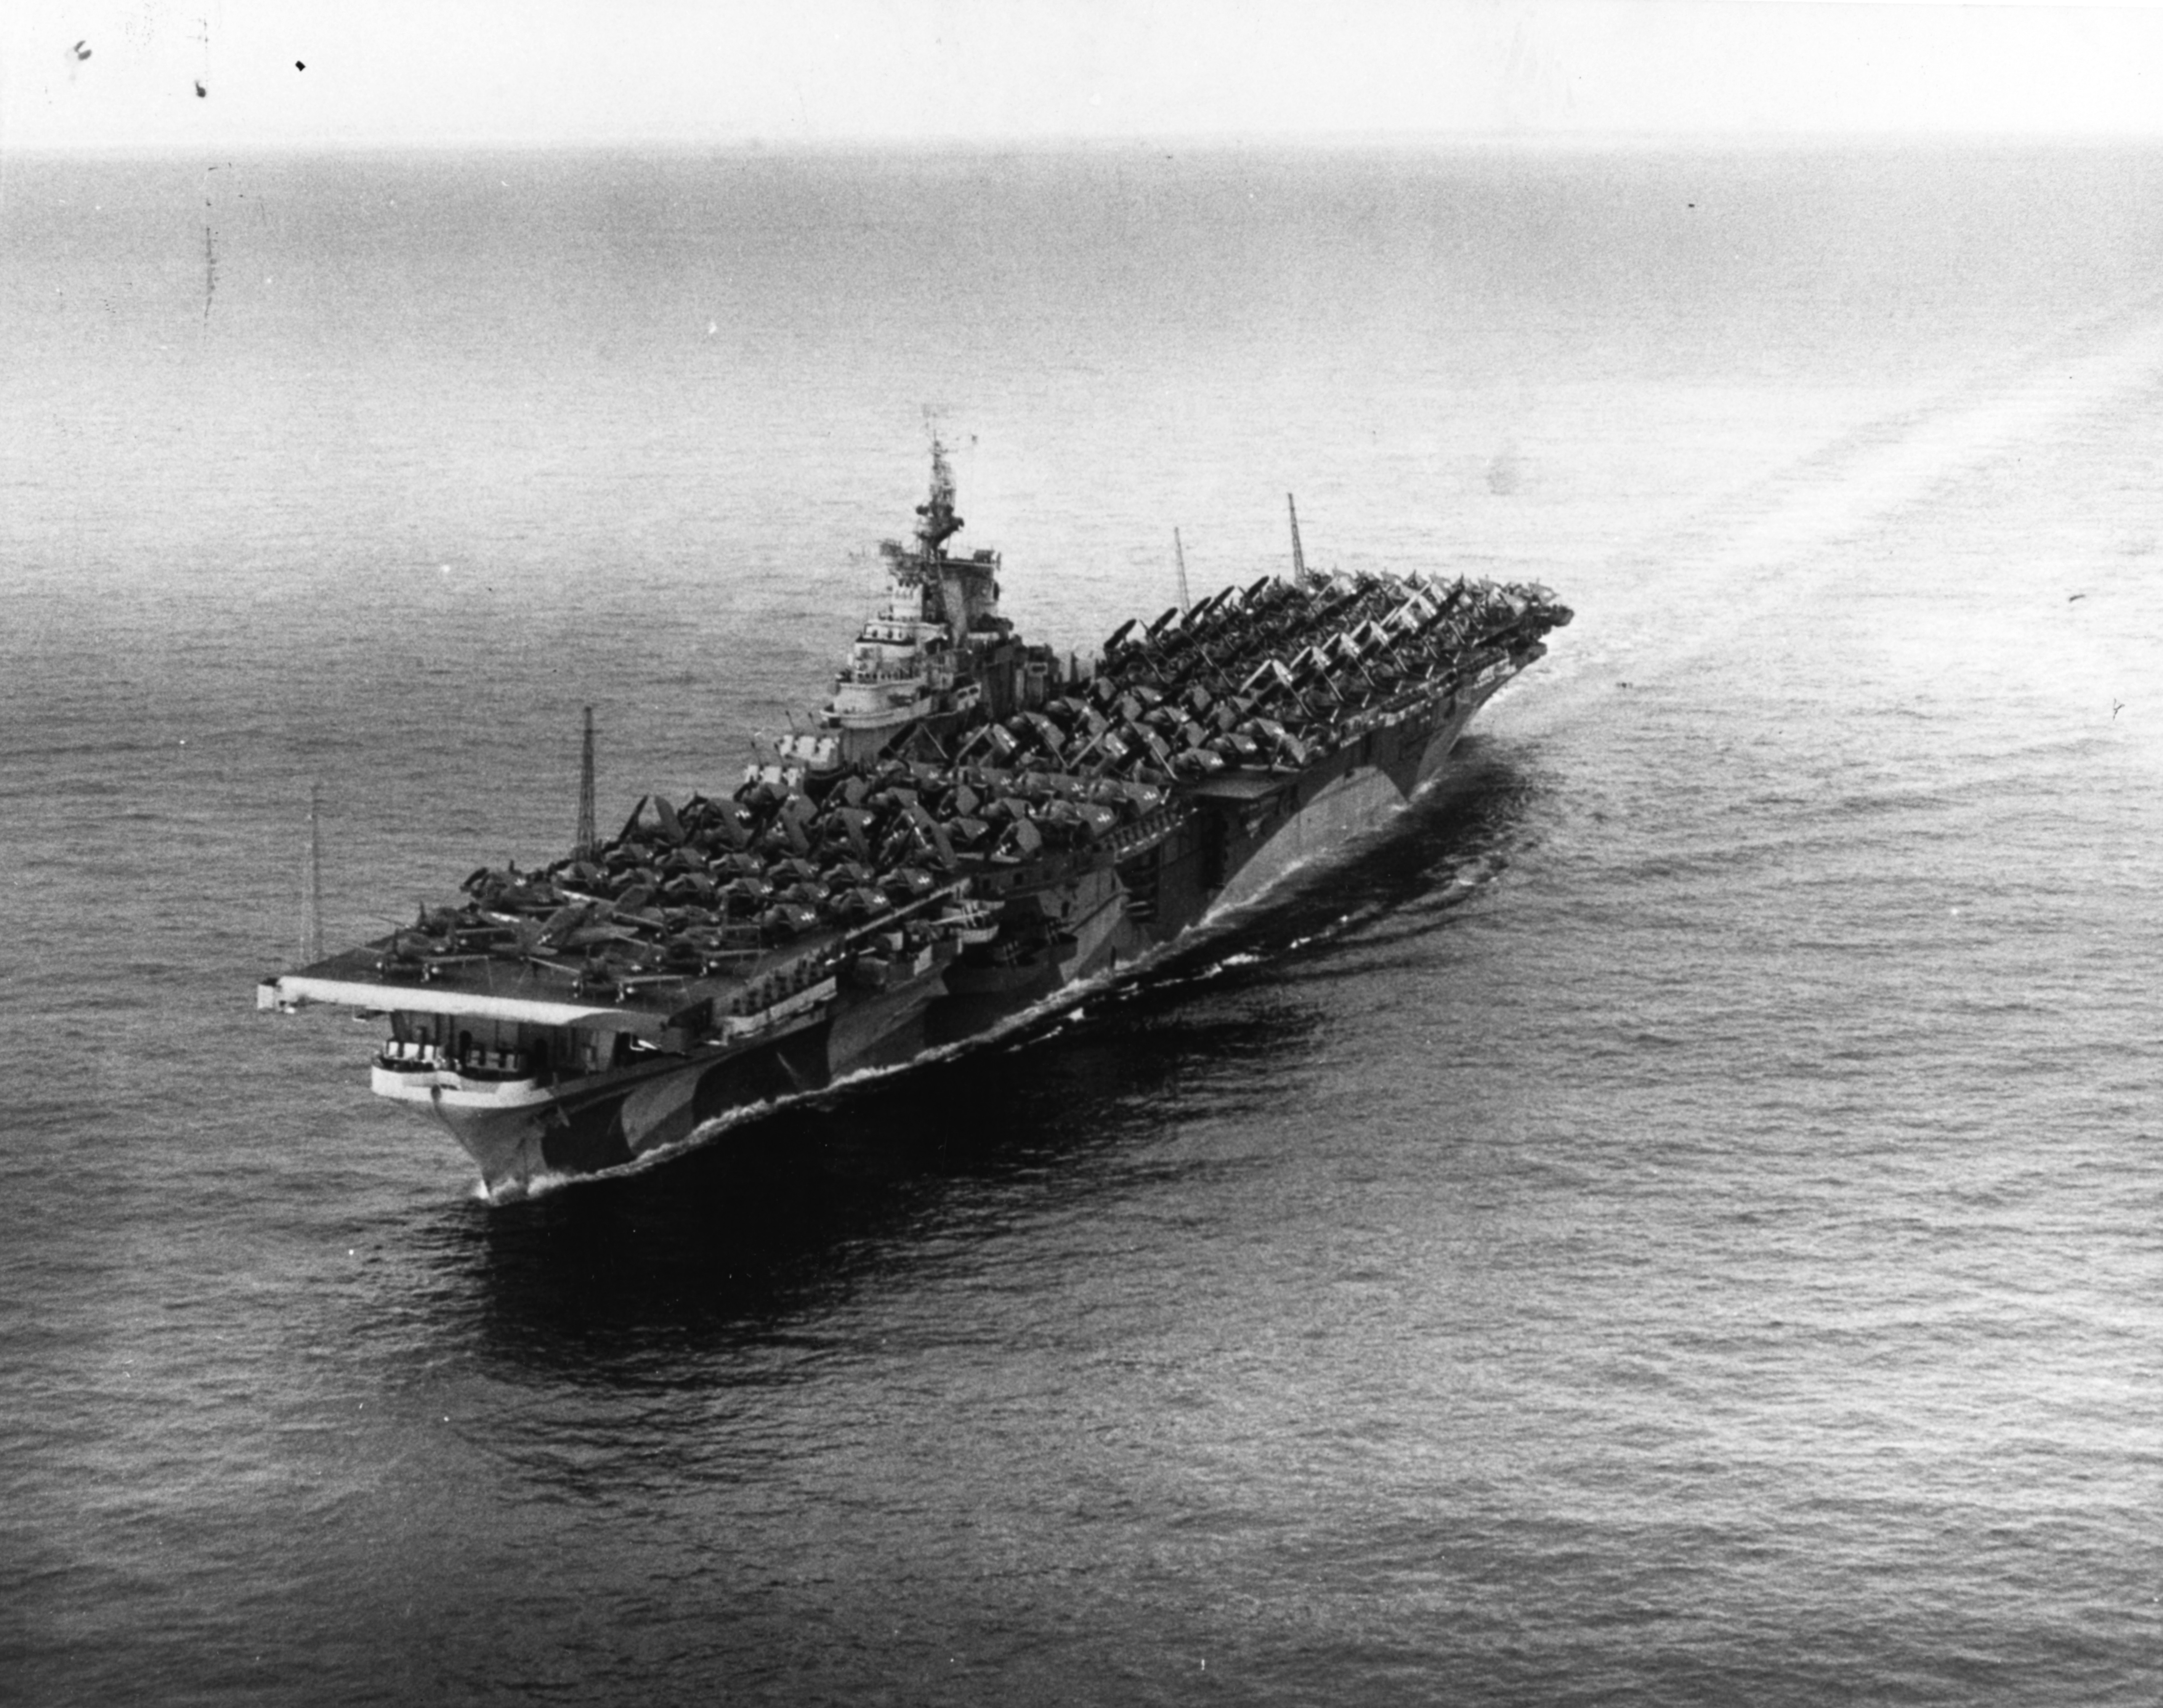 Carrier Ticonderoga off San Diego, California, United States, 16 Sep 1944; note extra aircraft loaded on deck destined for Hawaii, and camouflage pattern Measure 33 Design 10a. Photo 1 of 2.